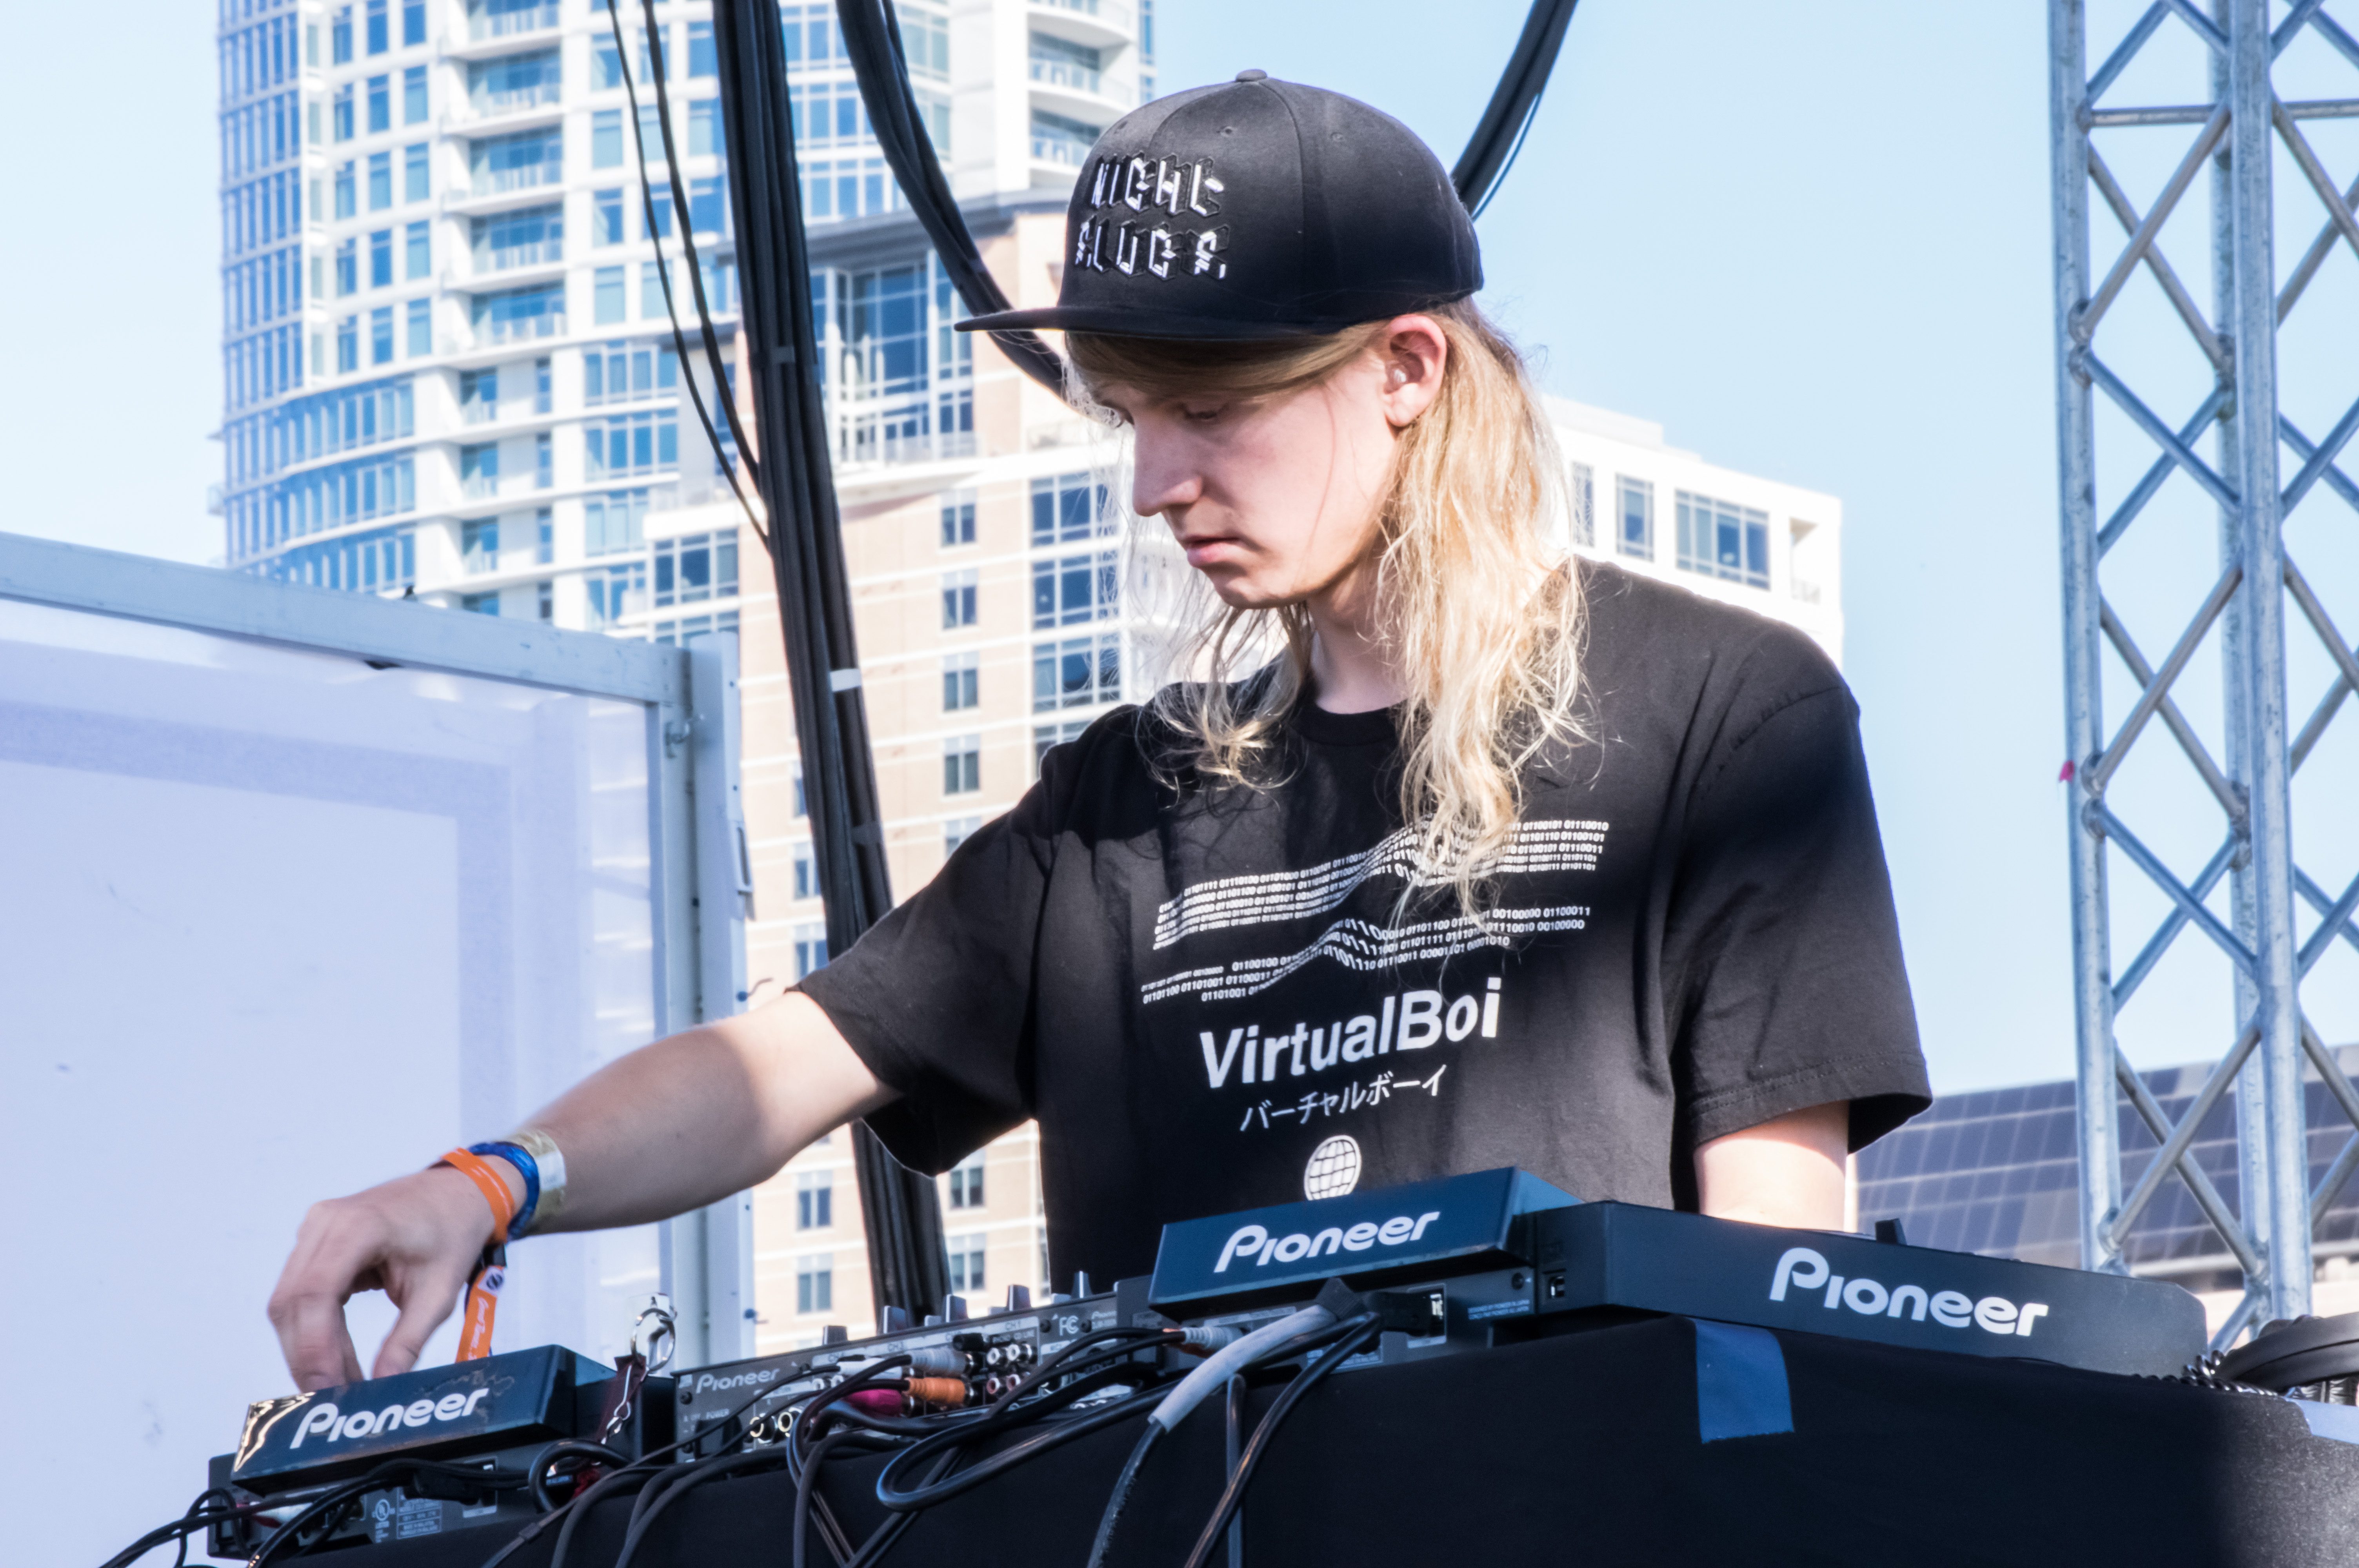 Cashmere Cat Announces New Album Princess Catgirl For September 2019 Release Debuts New CGI Animated Video For “Emotions”